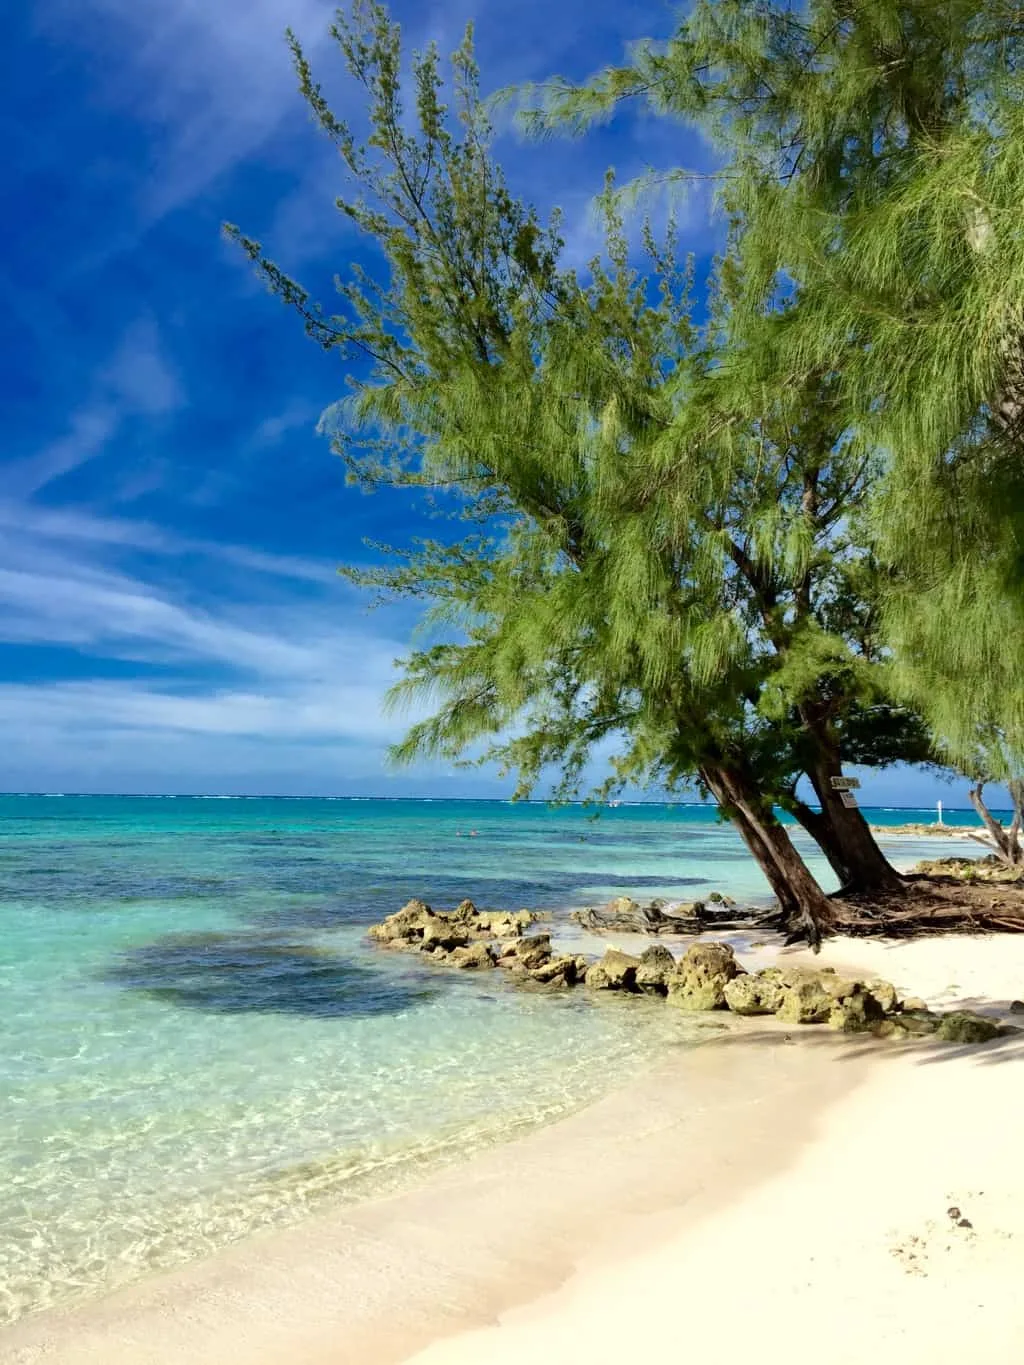 What to See and Do in Cayman Islands, The ultimate experience in Cayman Islands, #Cayman #CaymanIslands #Caribbean